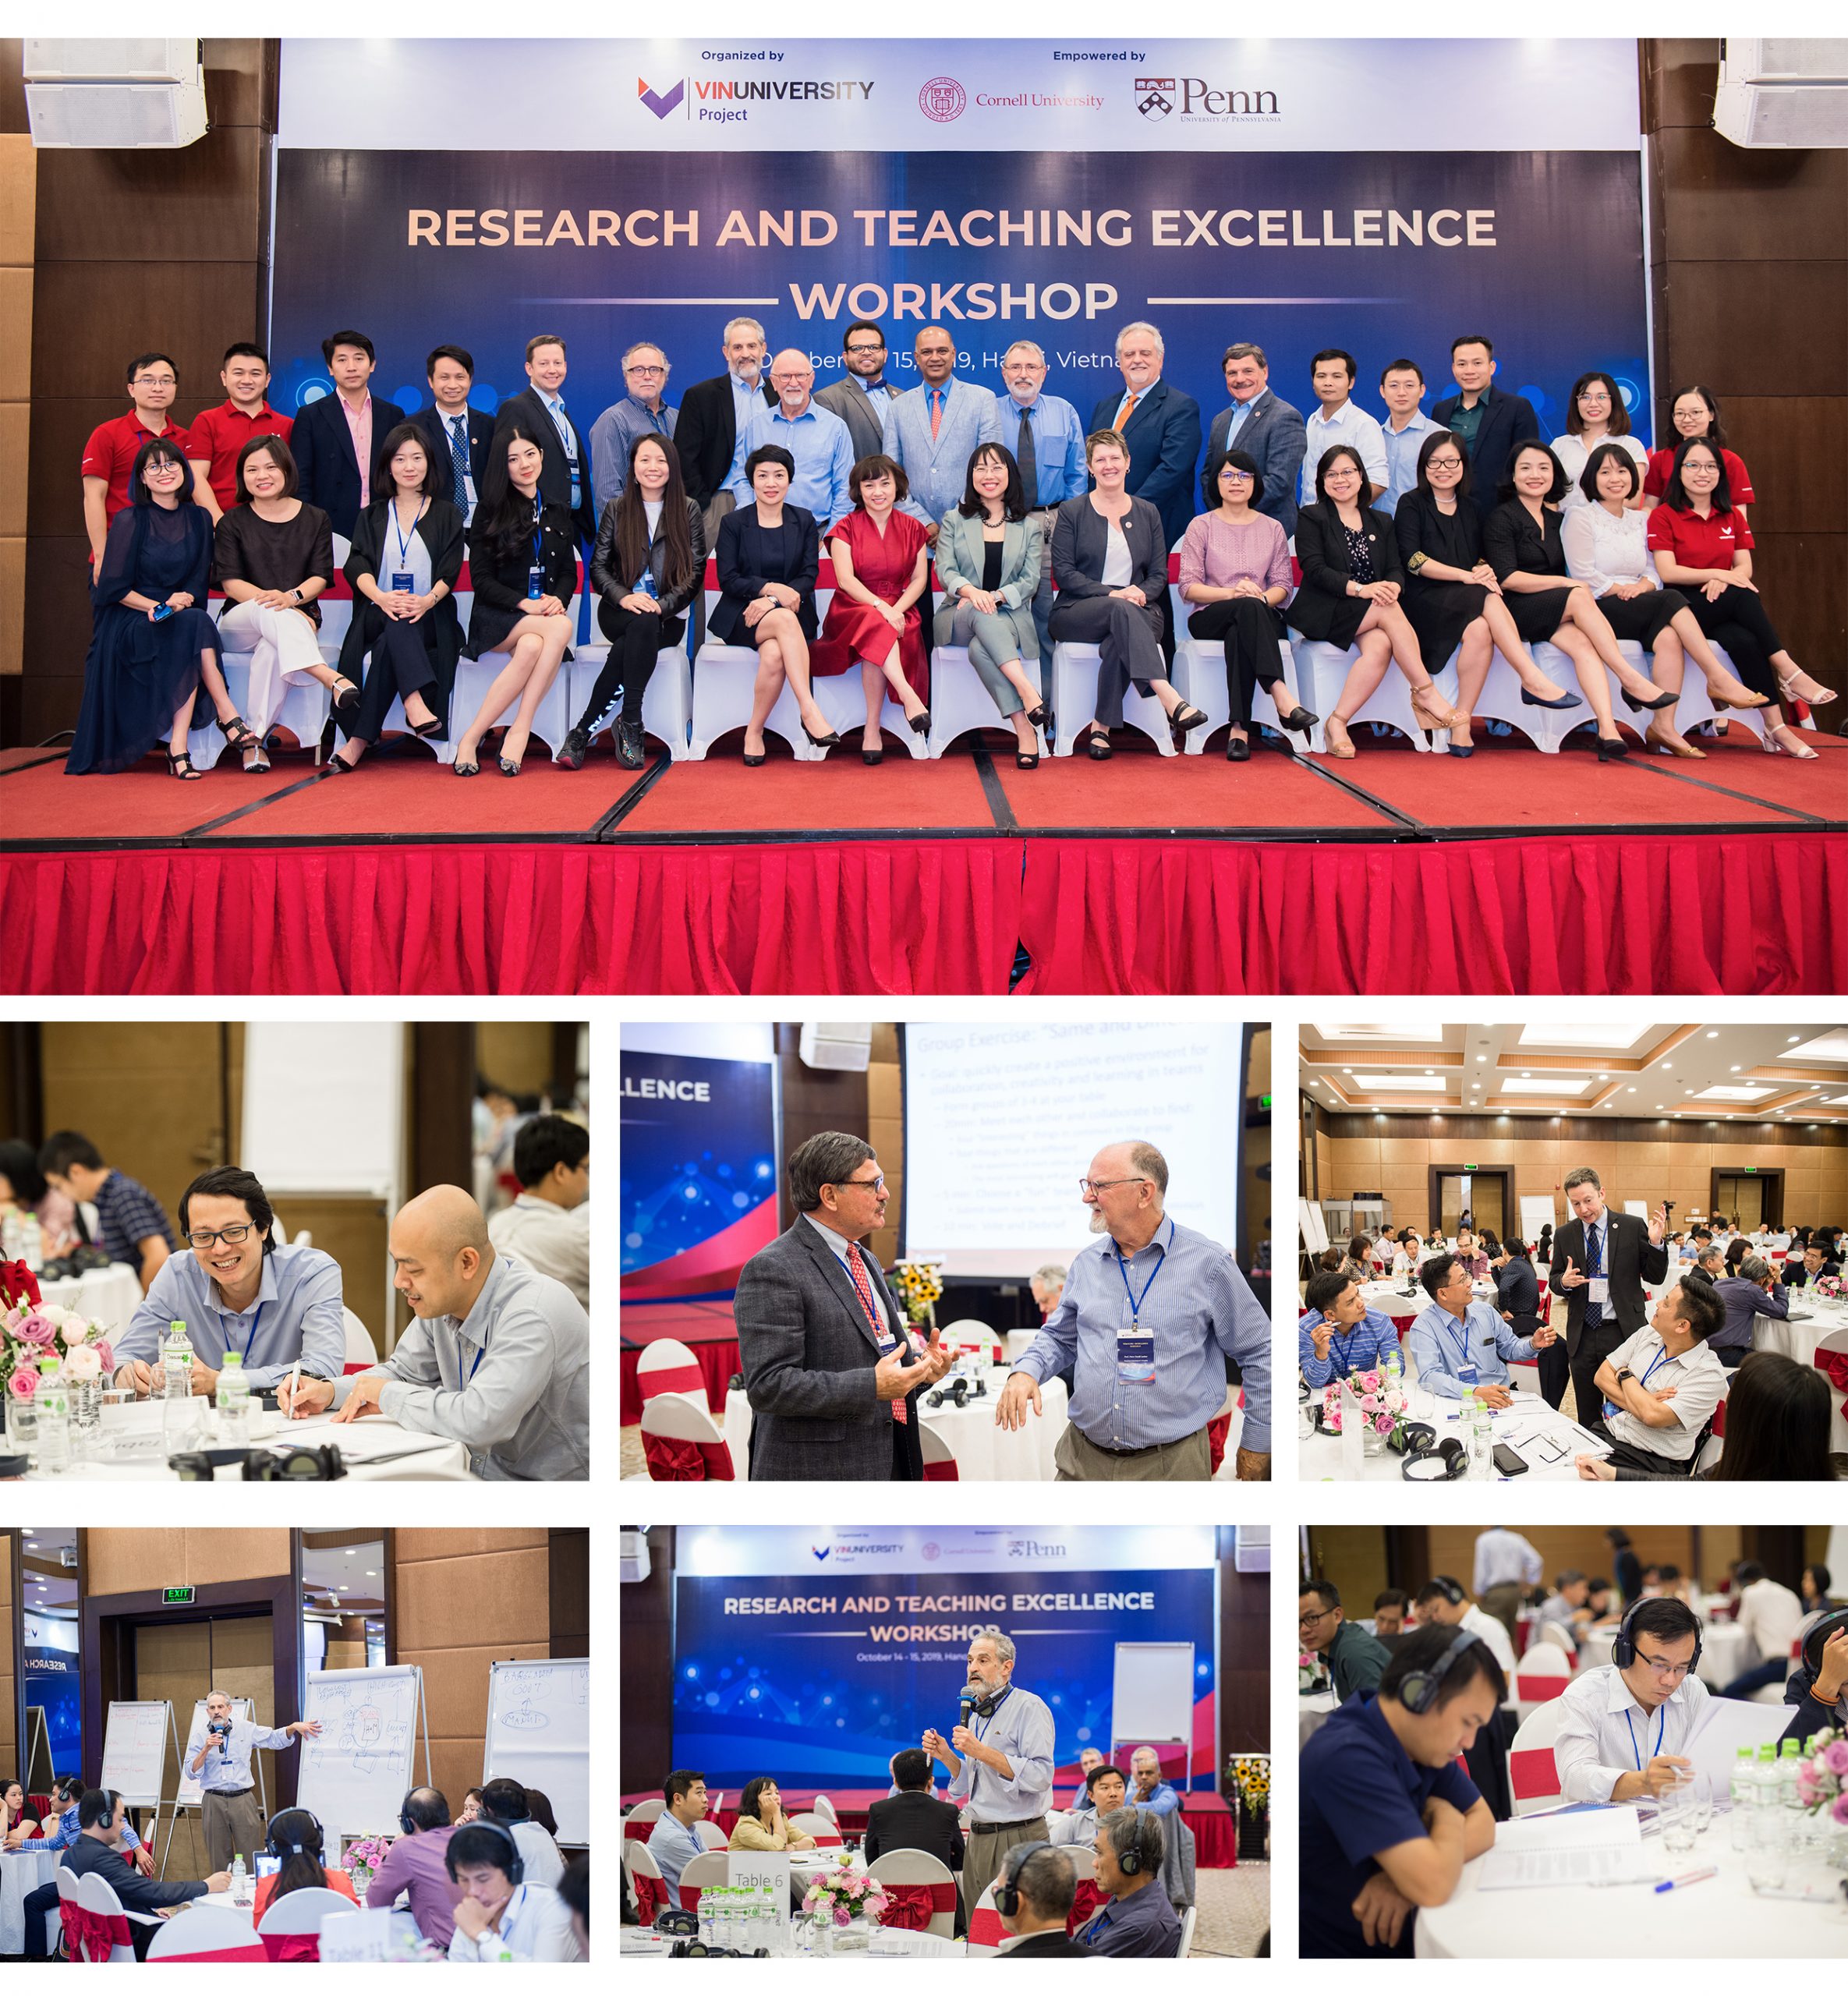 https://library.vinuni.edu.vn/events/research-and-teaching-excellence-workshop-2019/